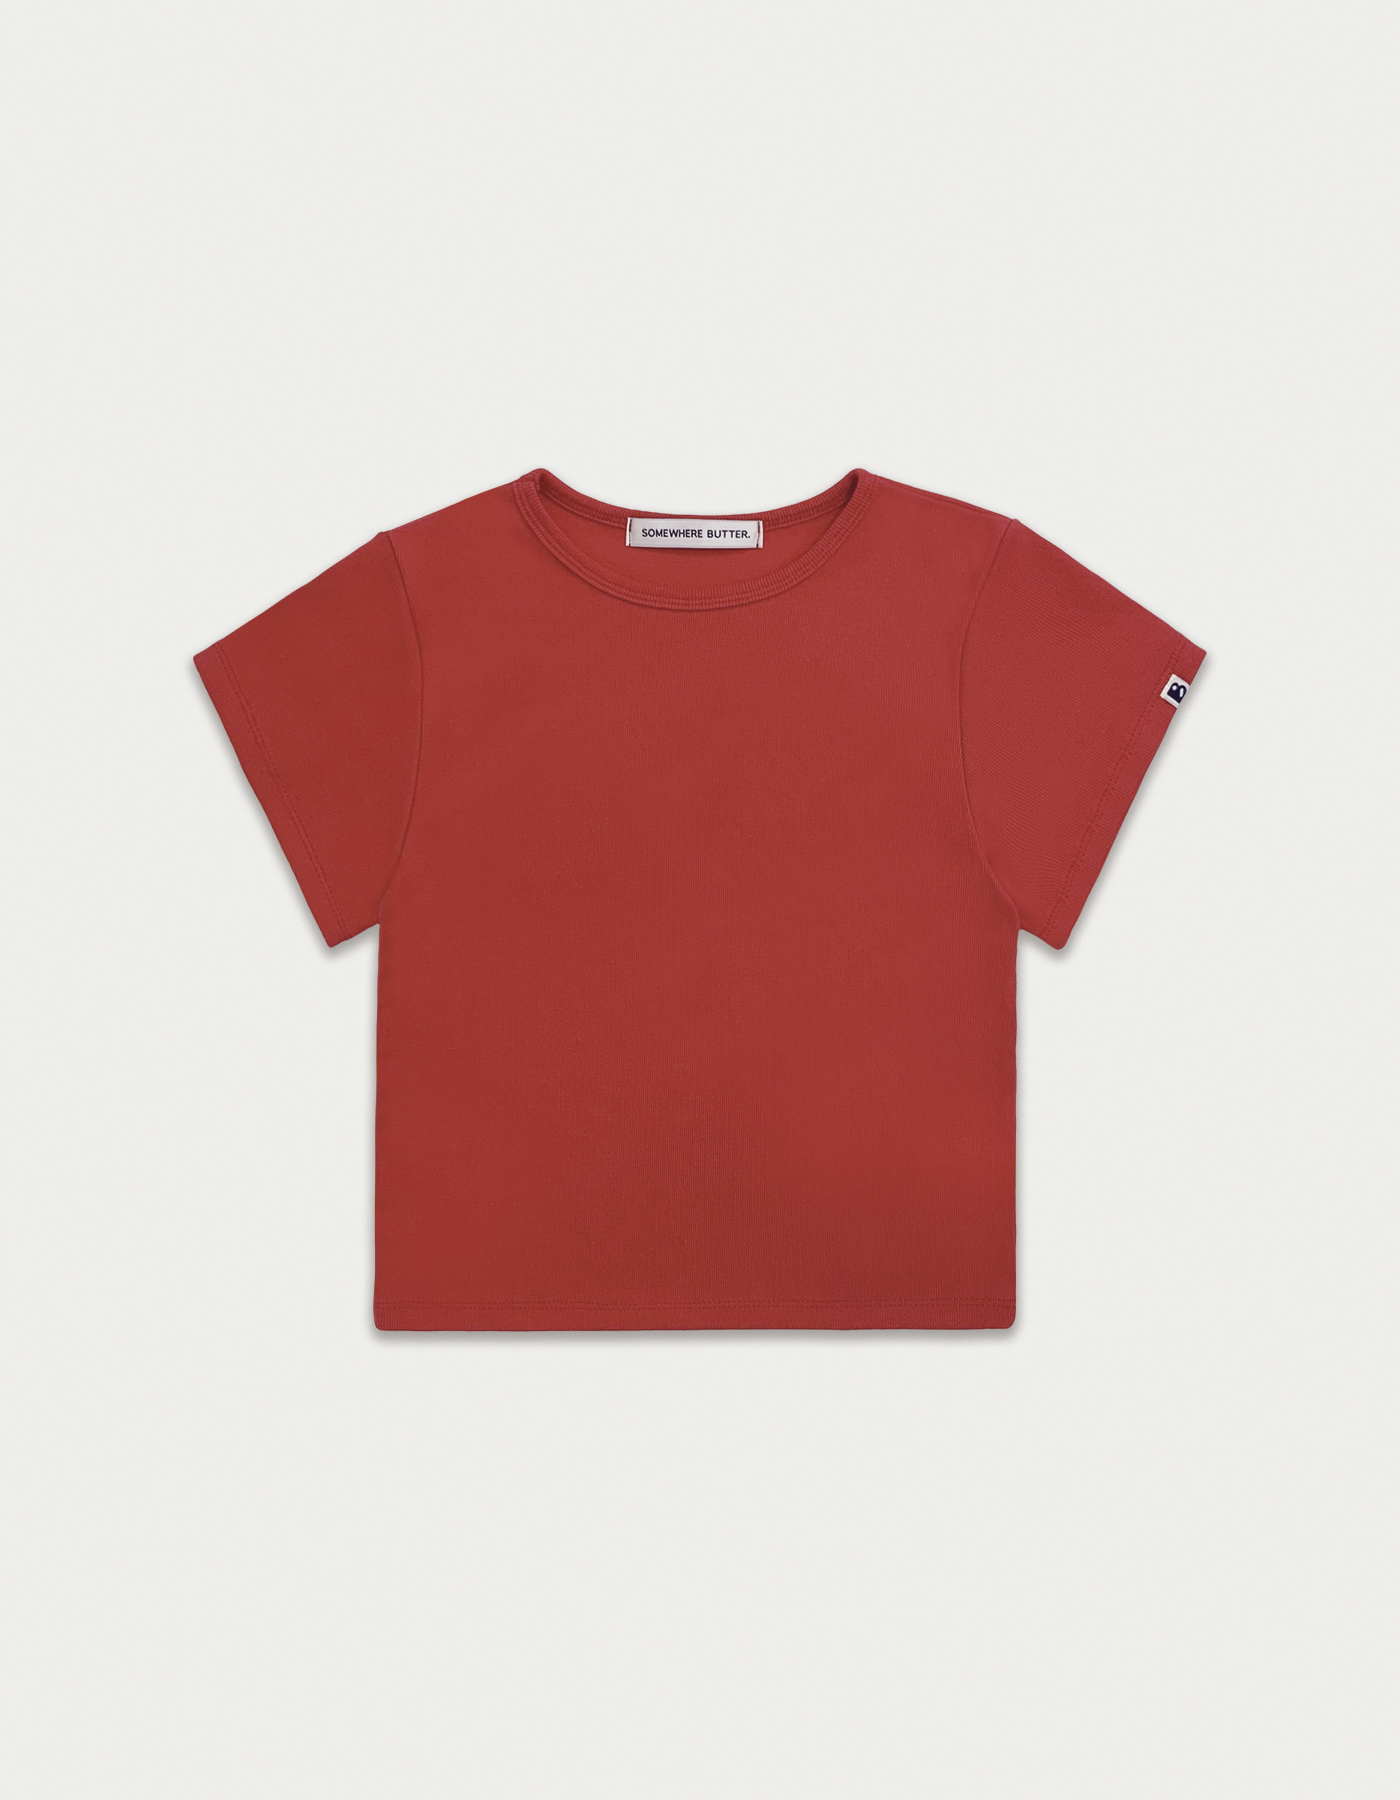 [2nd Order 5.28 출고] Essential clean top - red